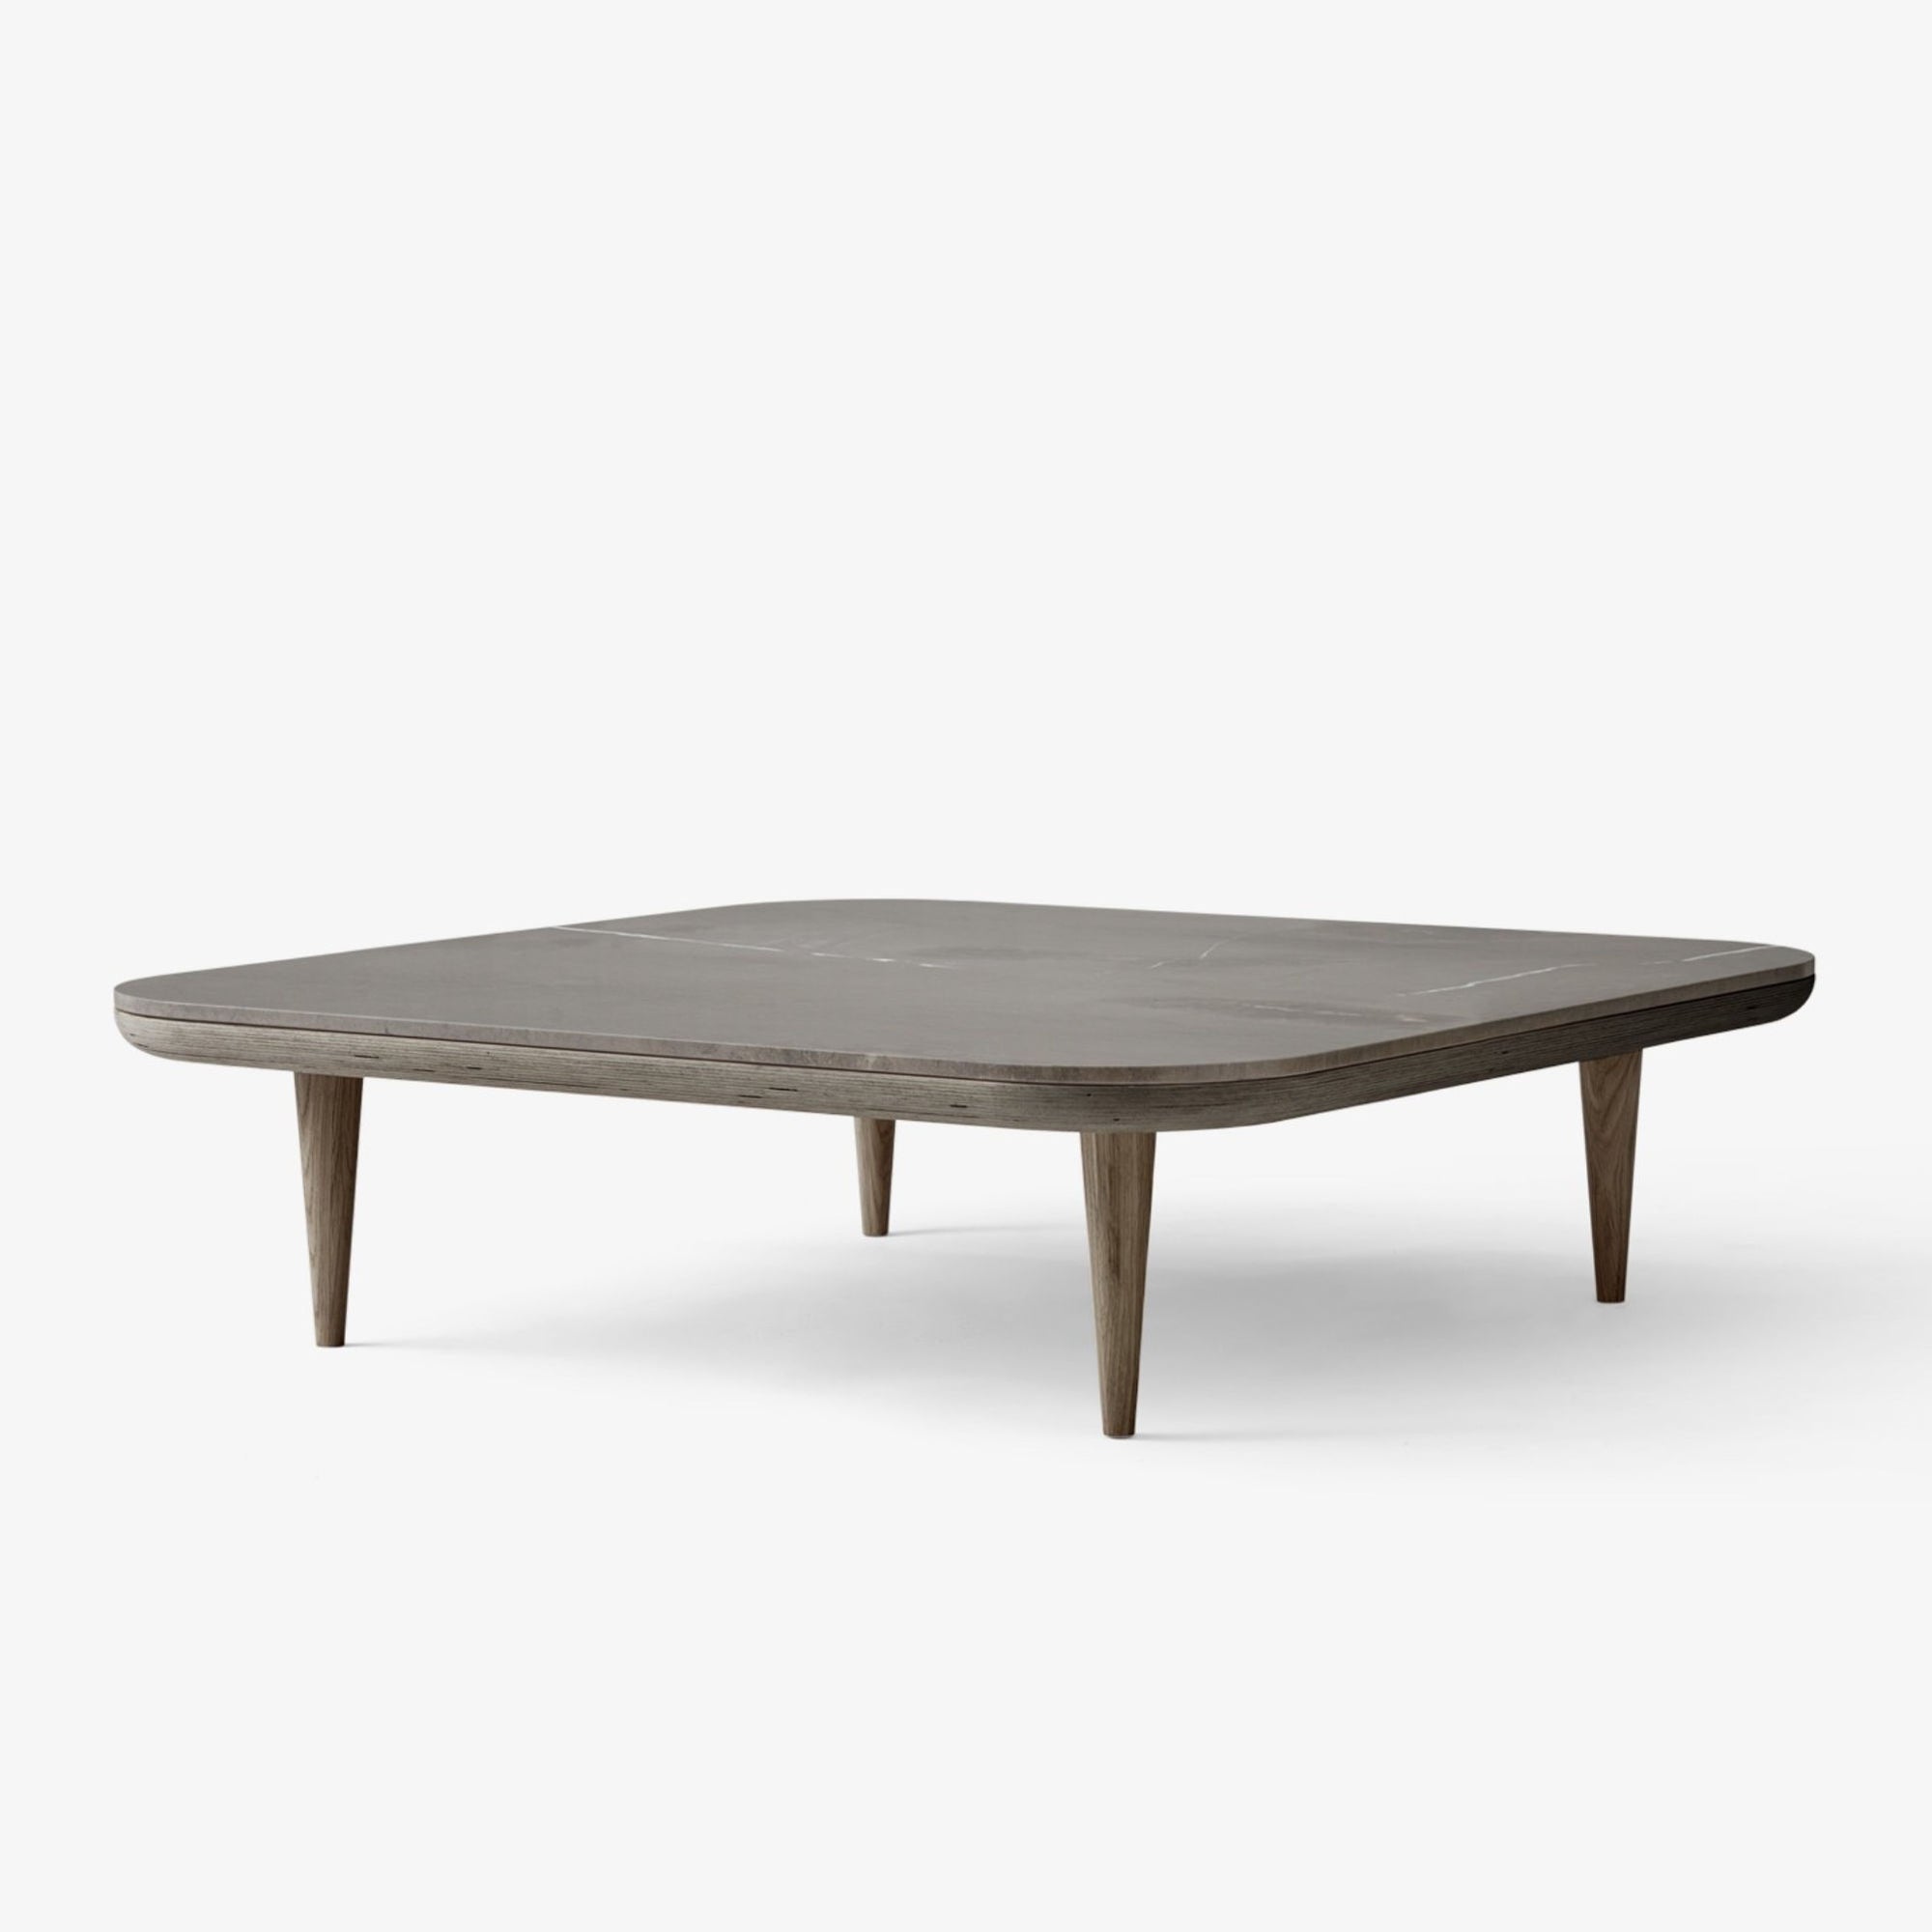 &Tradition SC11 Fly Coffee Table , Smoked Oiled Oak-Honed Azul Valverde Marble